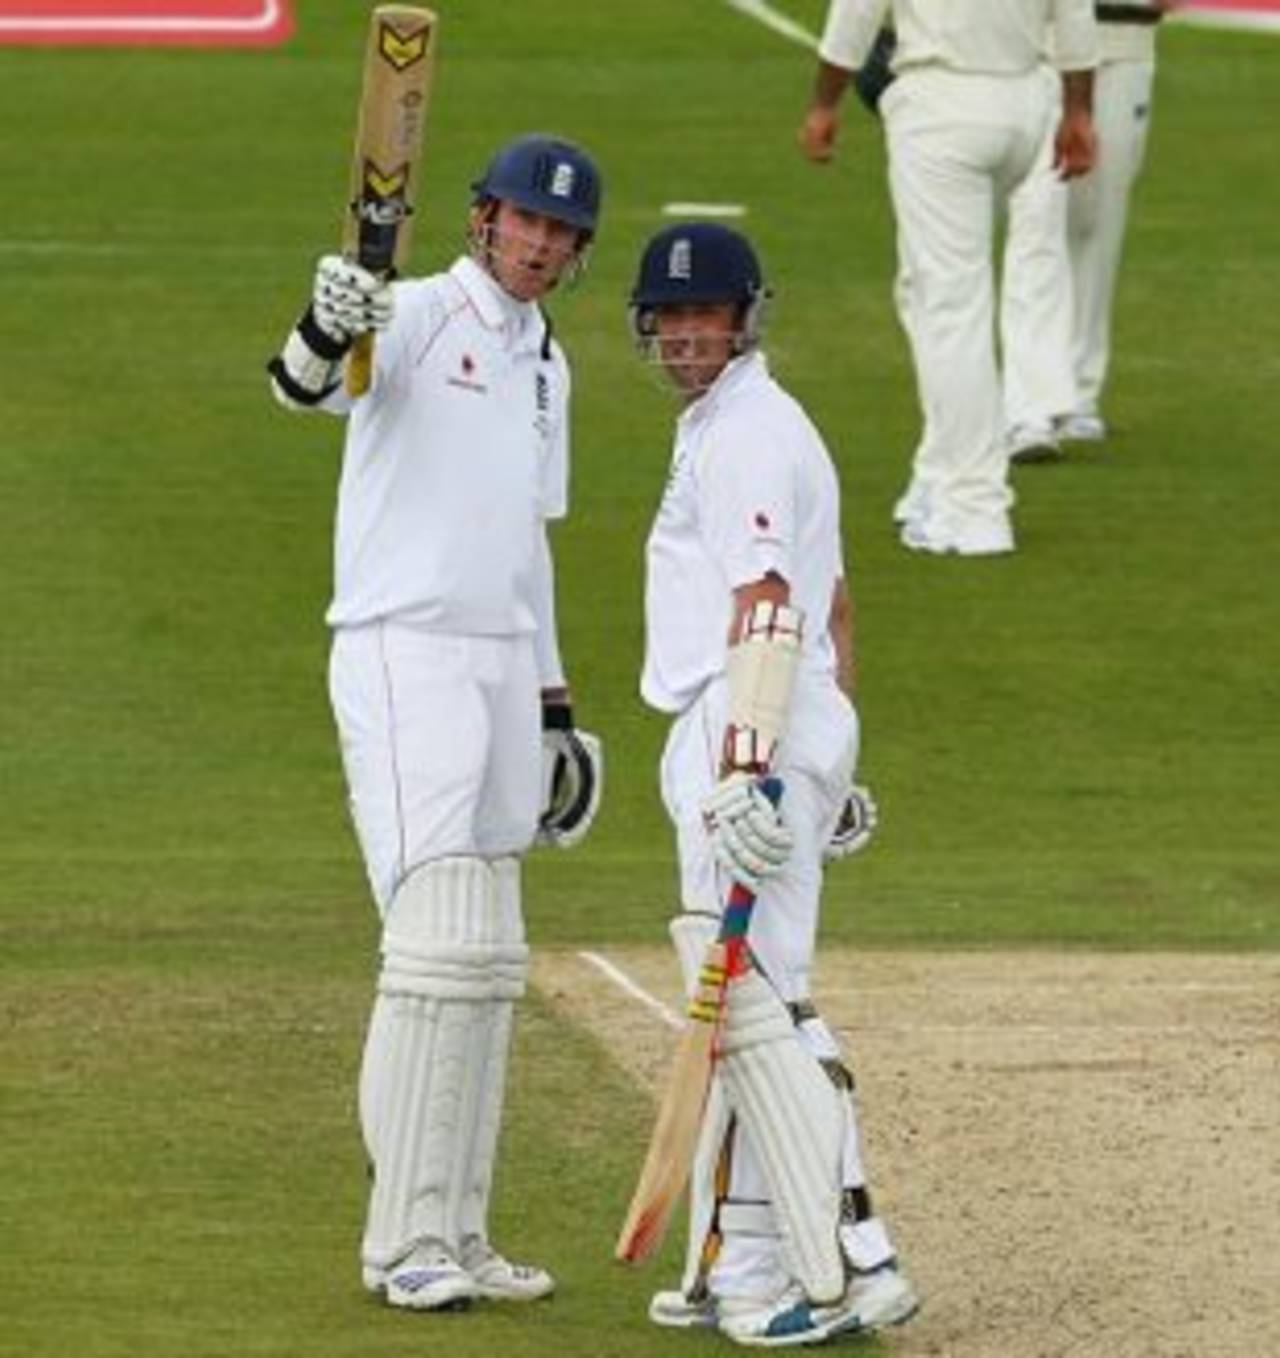 Stuart Broad and Graeme Swann added 108 for the eighth wicket, England v Australia, 4th Test, Headingley, 3rd day, August 9, 2009